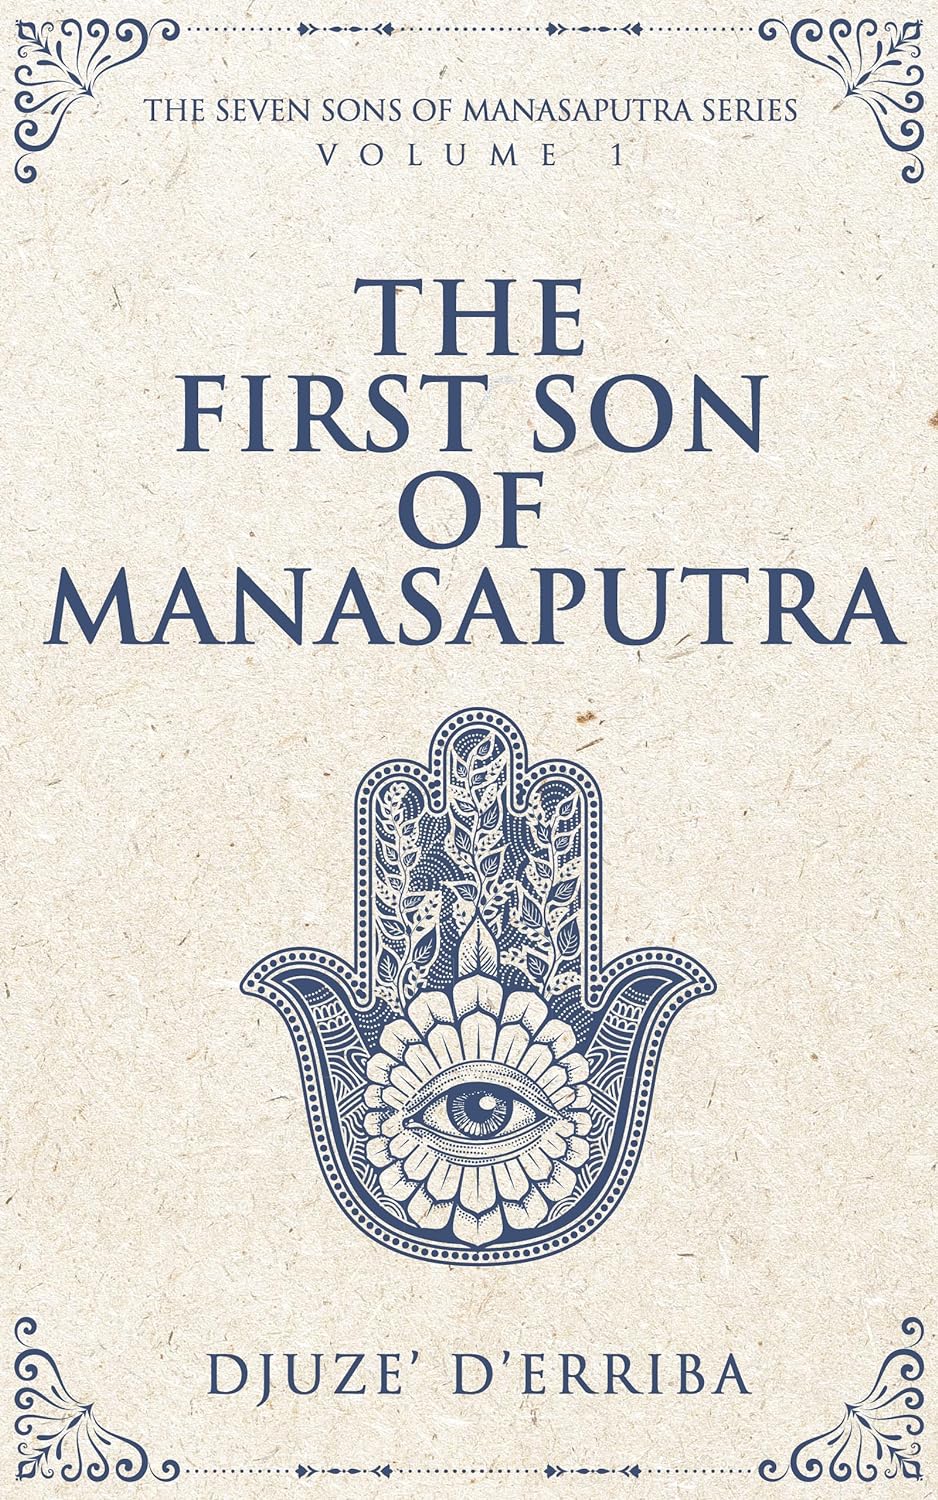 New book "The First Son of Manasaputra" by Djuze’ D’Erriba is released, the first volume in a series of spiritual poetry collections uncovering universal truths from across theology and philosophy 